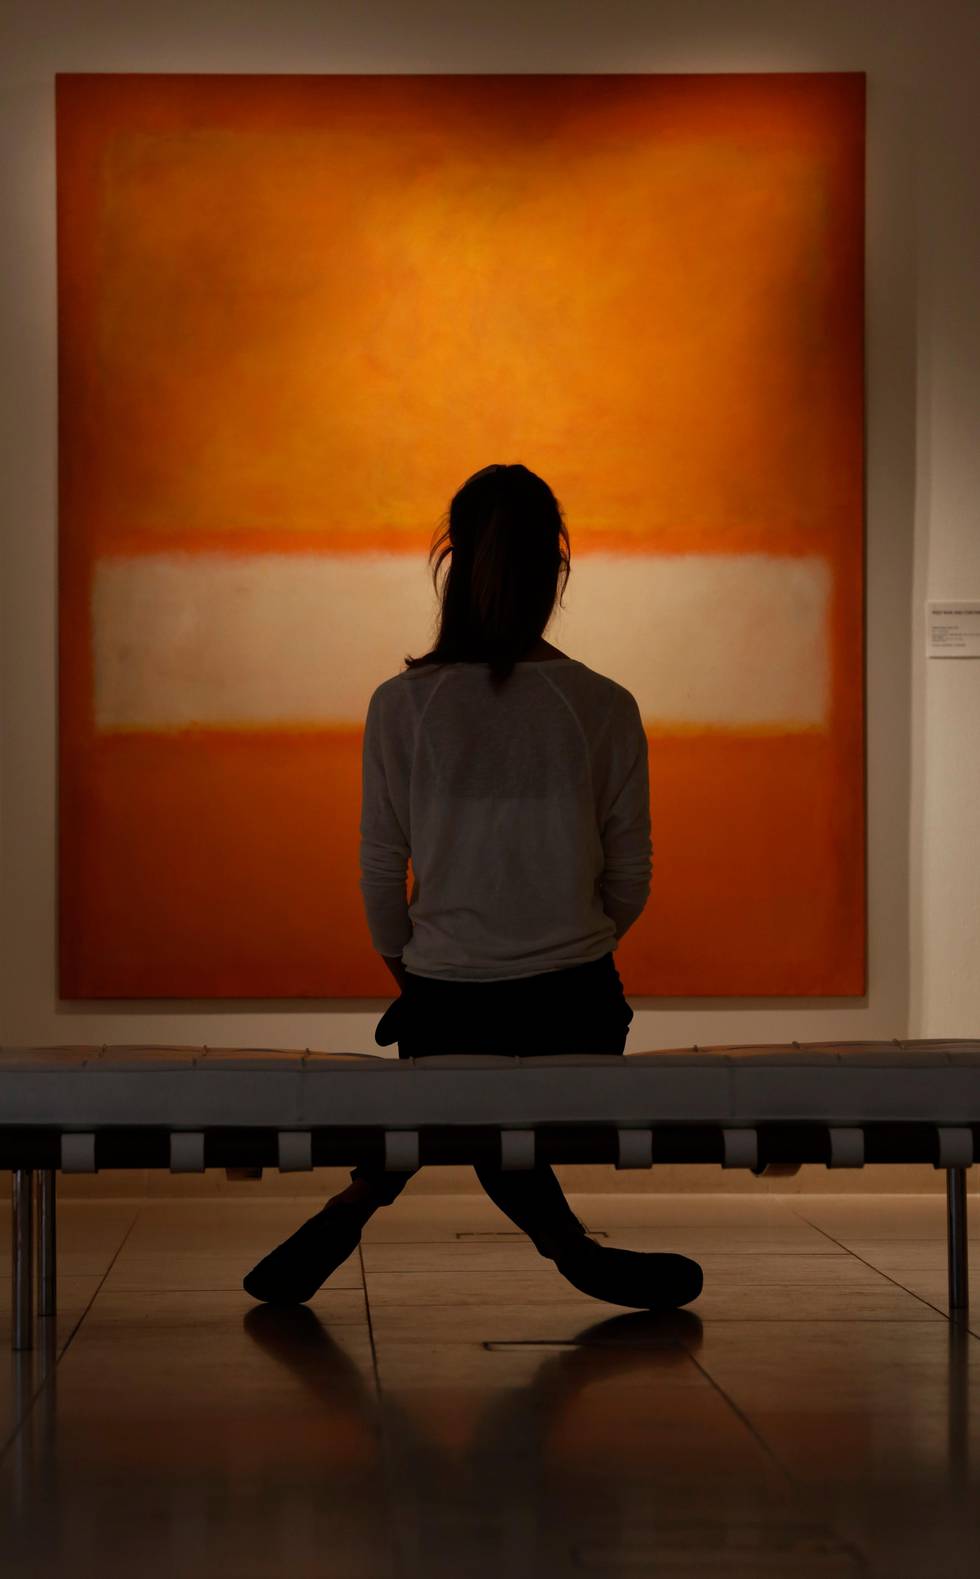 An auction house worker poses for photographers in front of an untitled oil on canvas 1957 painting by Mark Rothko in central London, Monday, Oct. 14, 2013. The artwork will be offered in auction at Christie's New York 'Evening Sale of Post-War and Contemporary Art' on Nov. 12, 2013. It is estimated to fetch some US$ 25-35 million (euro 18,4- 25,8 million). (AP Photo/Lefteris Pitarakis)